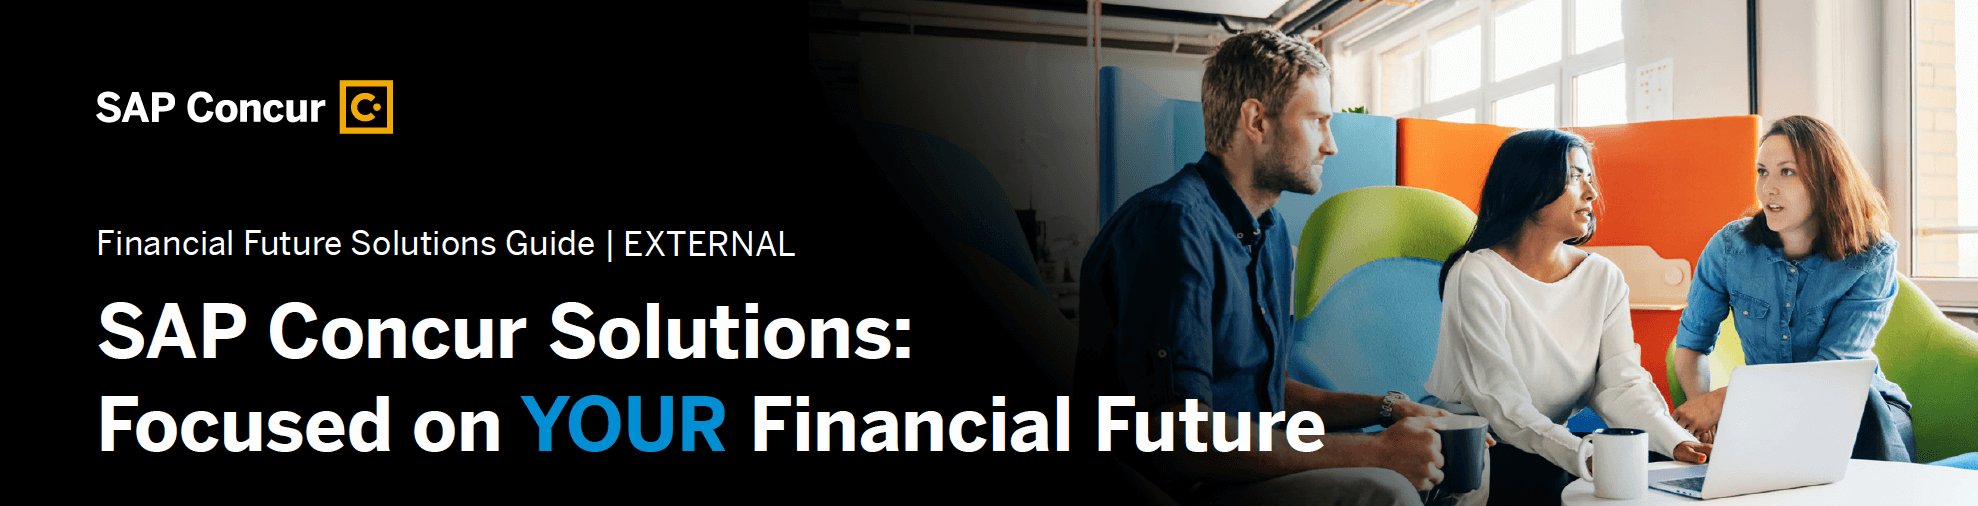 SAP Concur Solutions: Focused on YOUR Financial Future